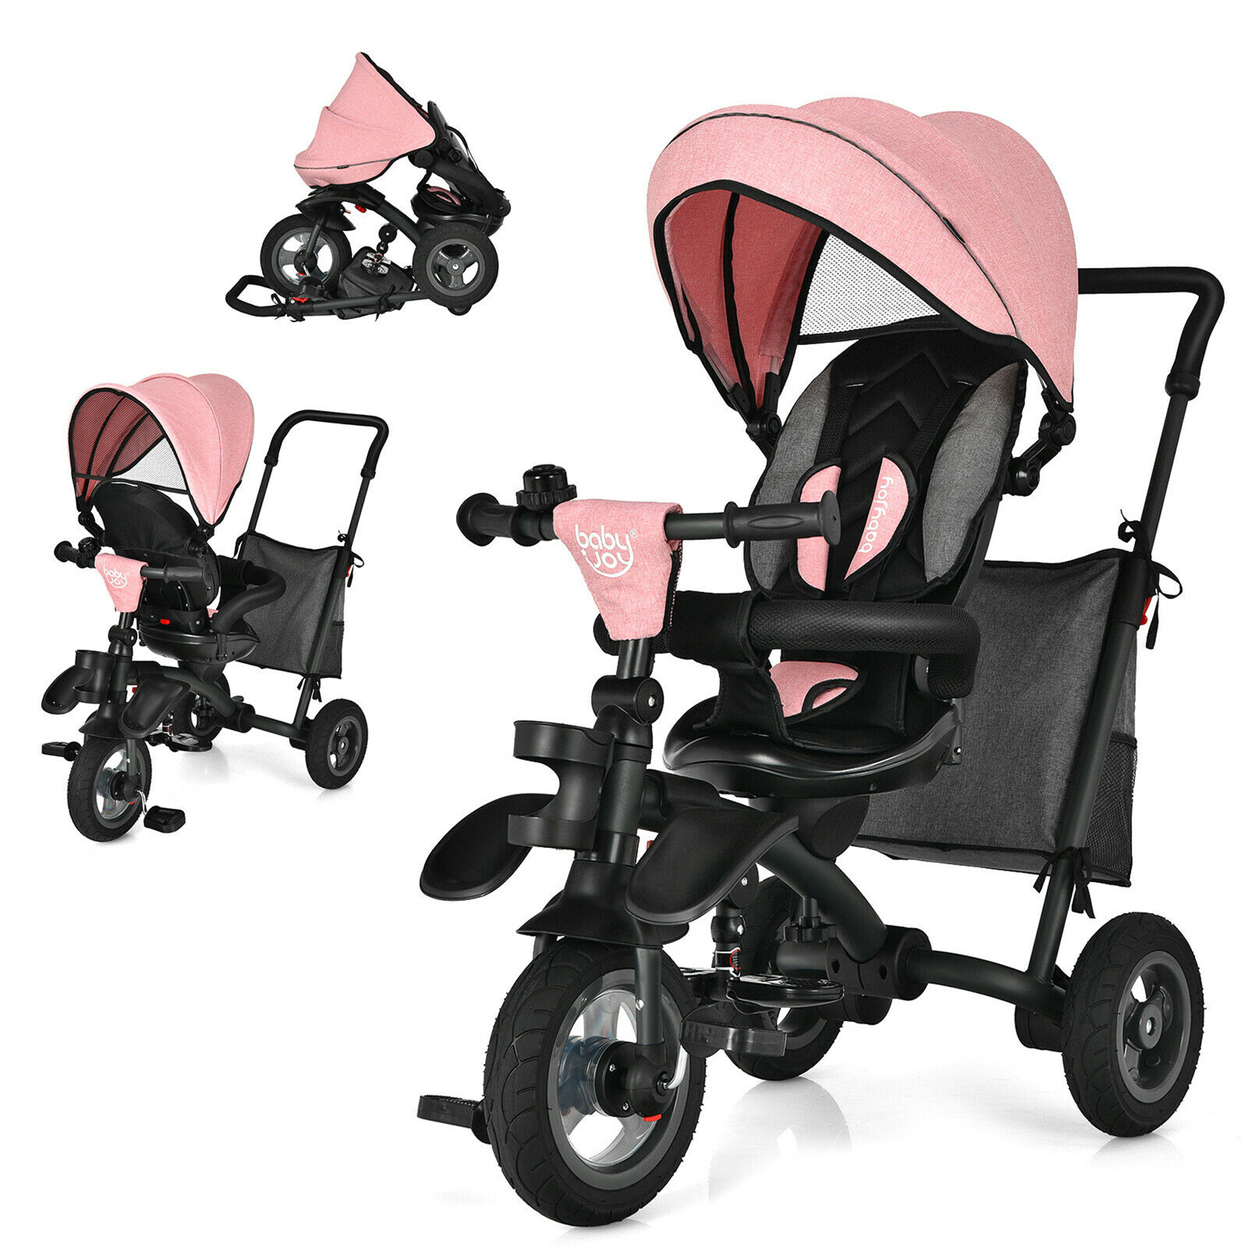 7-In-1 Kids Baby Tricycle Folding Steer Stroller W/ Rotatable Seat - Pink